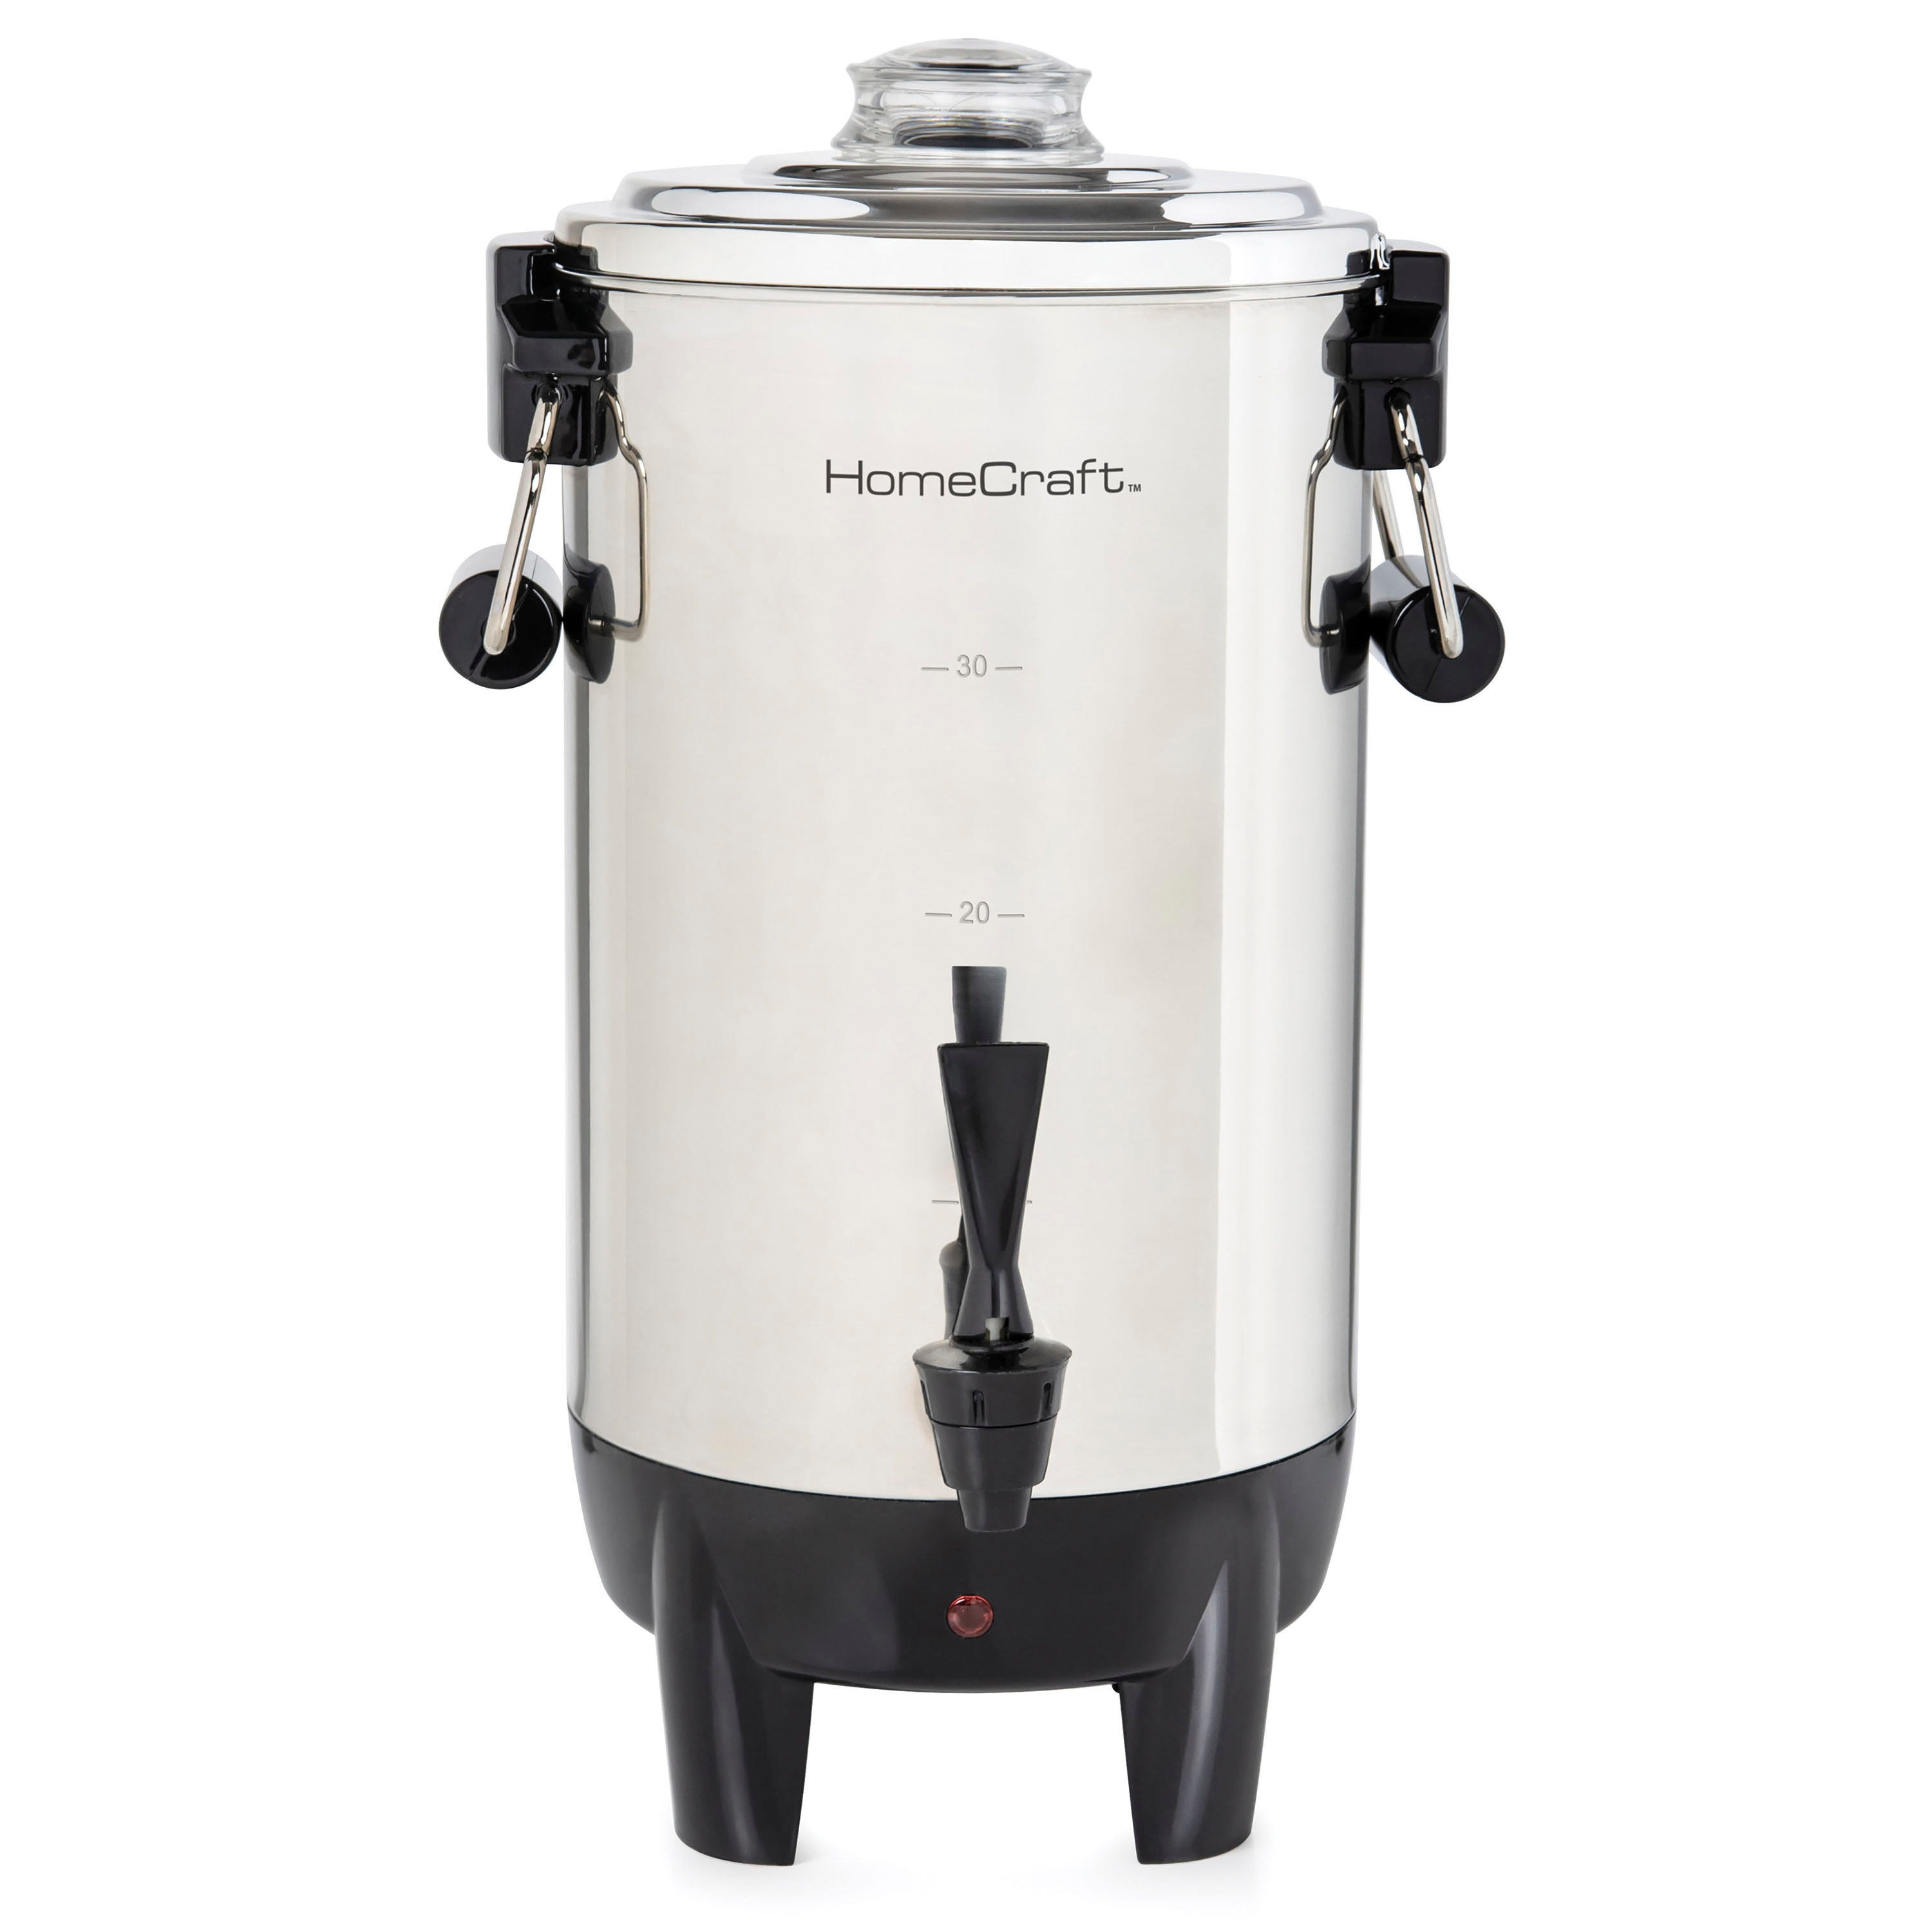  Homecraft Electric Iced Tea Maker for Sweet Tea and